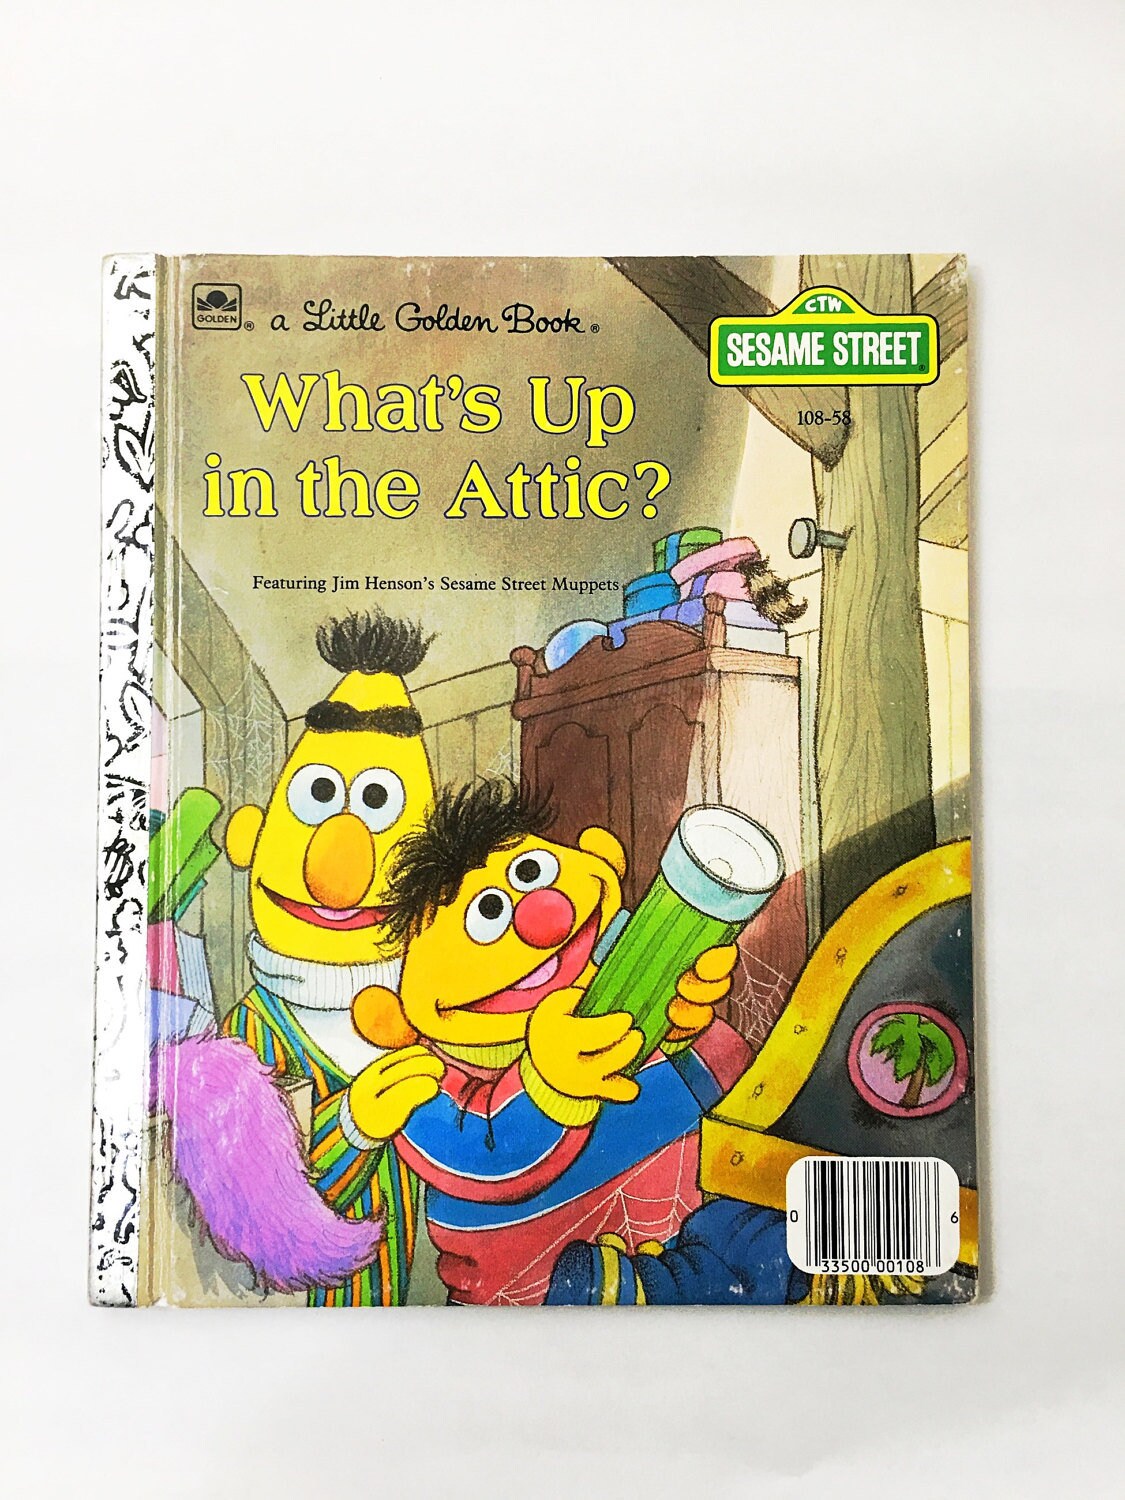 FIRST EDITION Sesame Street book. What's Up in the Attic. Vintage Little Golden Book circa 1987. Bert and Ernie. Jim Henson.